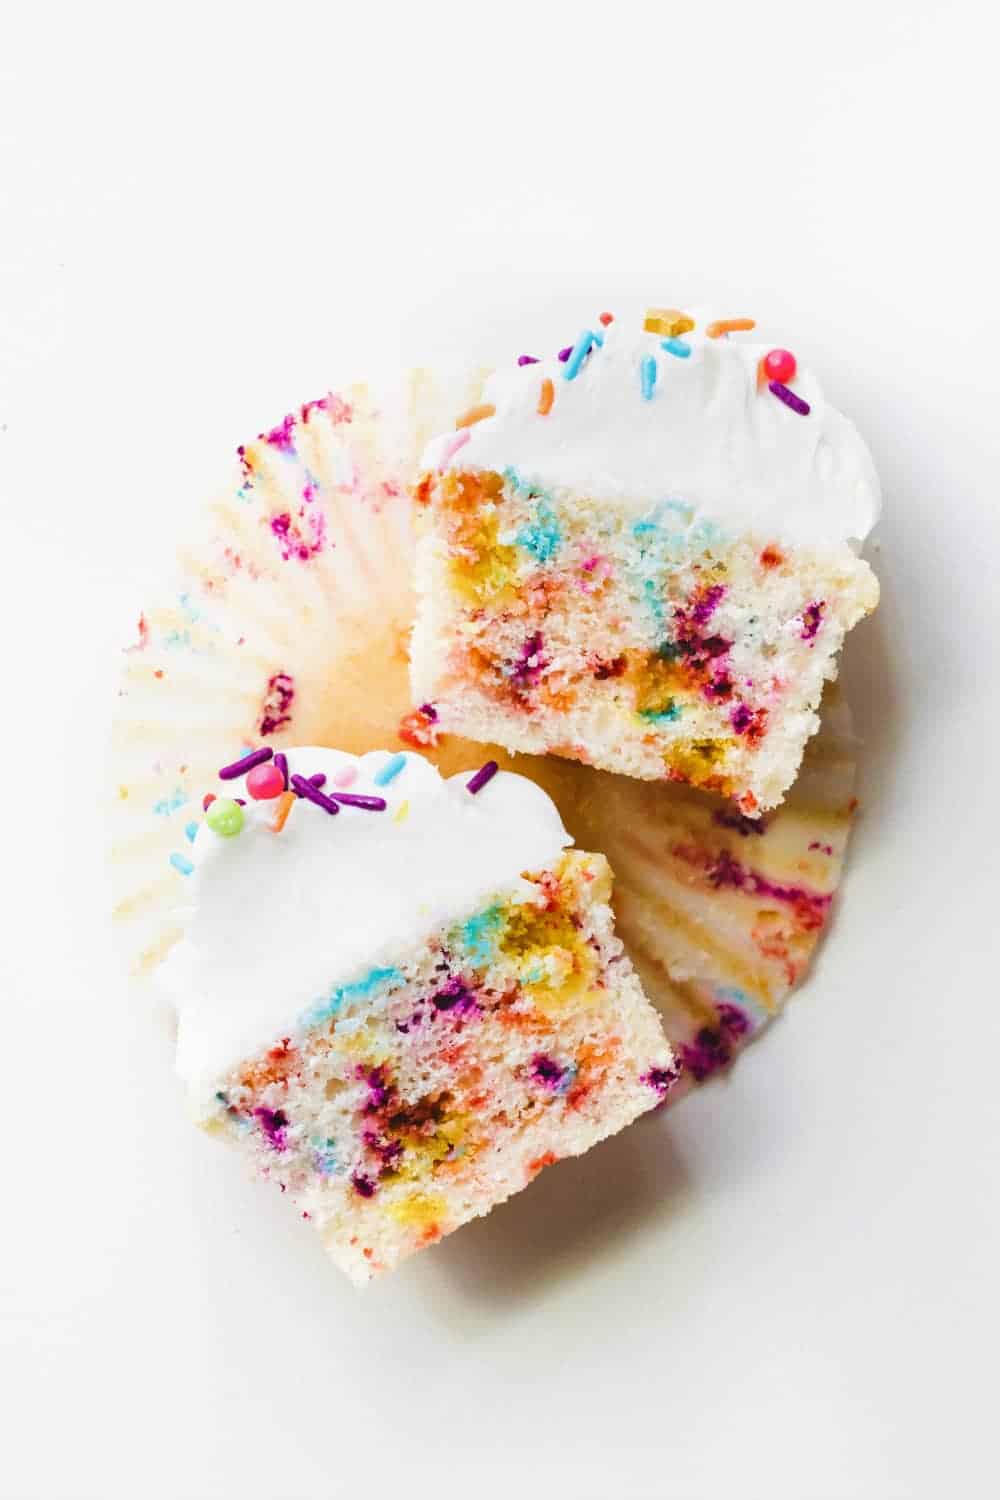 Funfetti cupcake cut in half to show the sprinkles